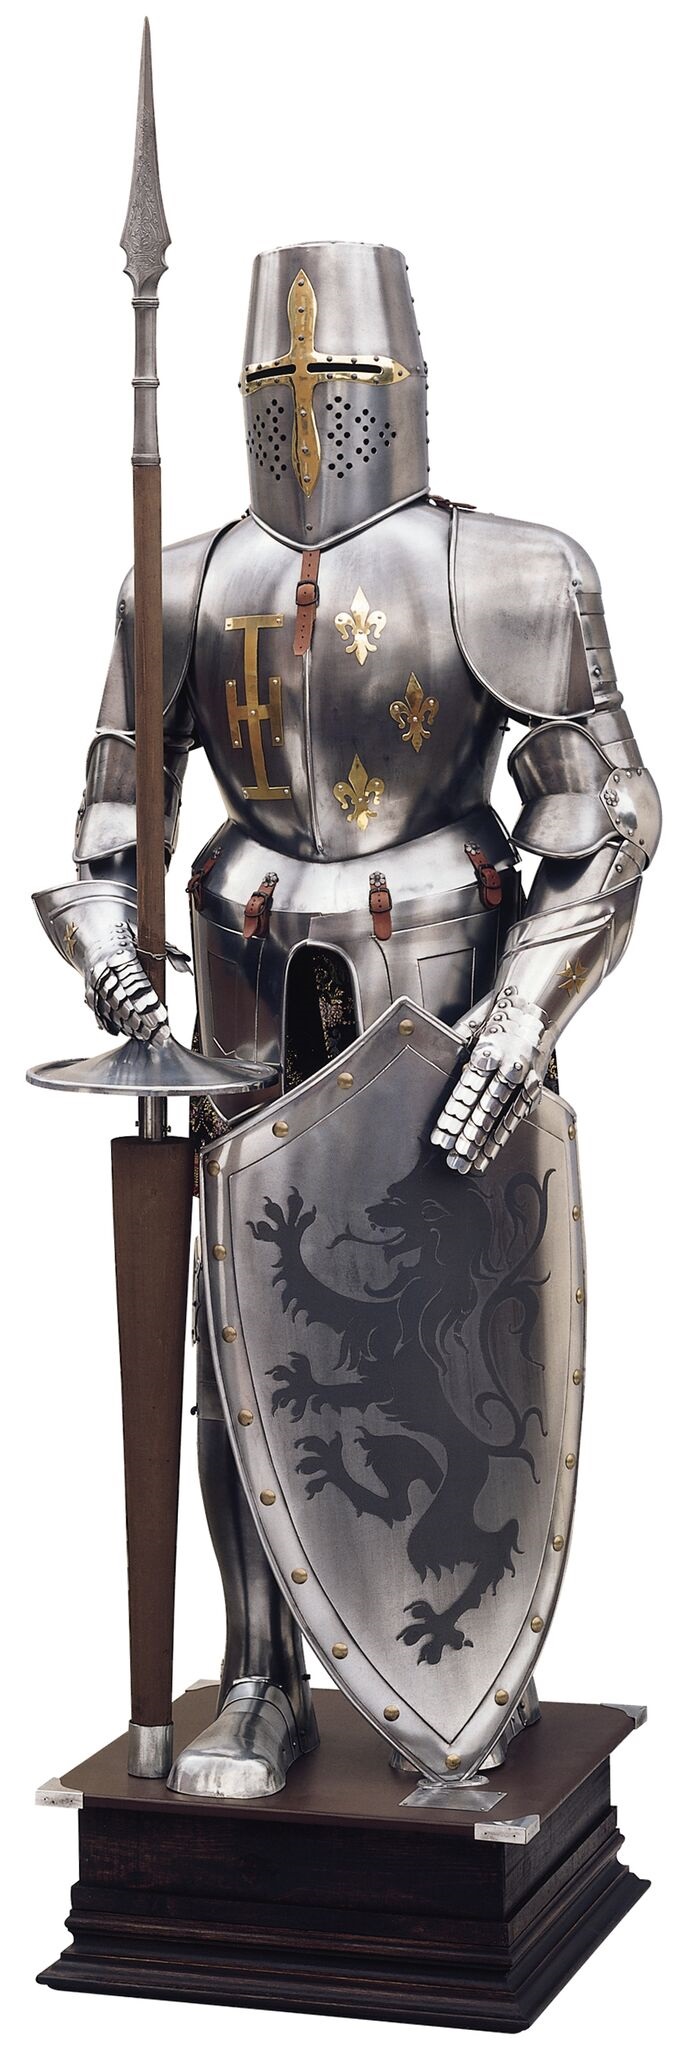 Ornate tournament armor with lance and shield